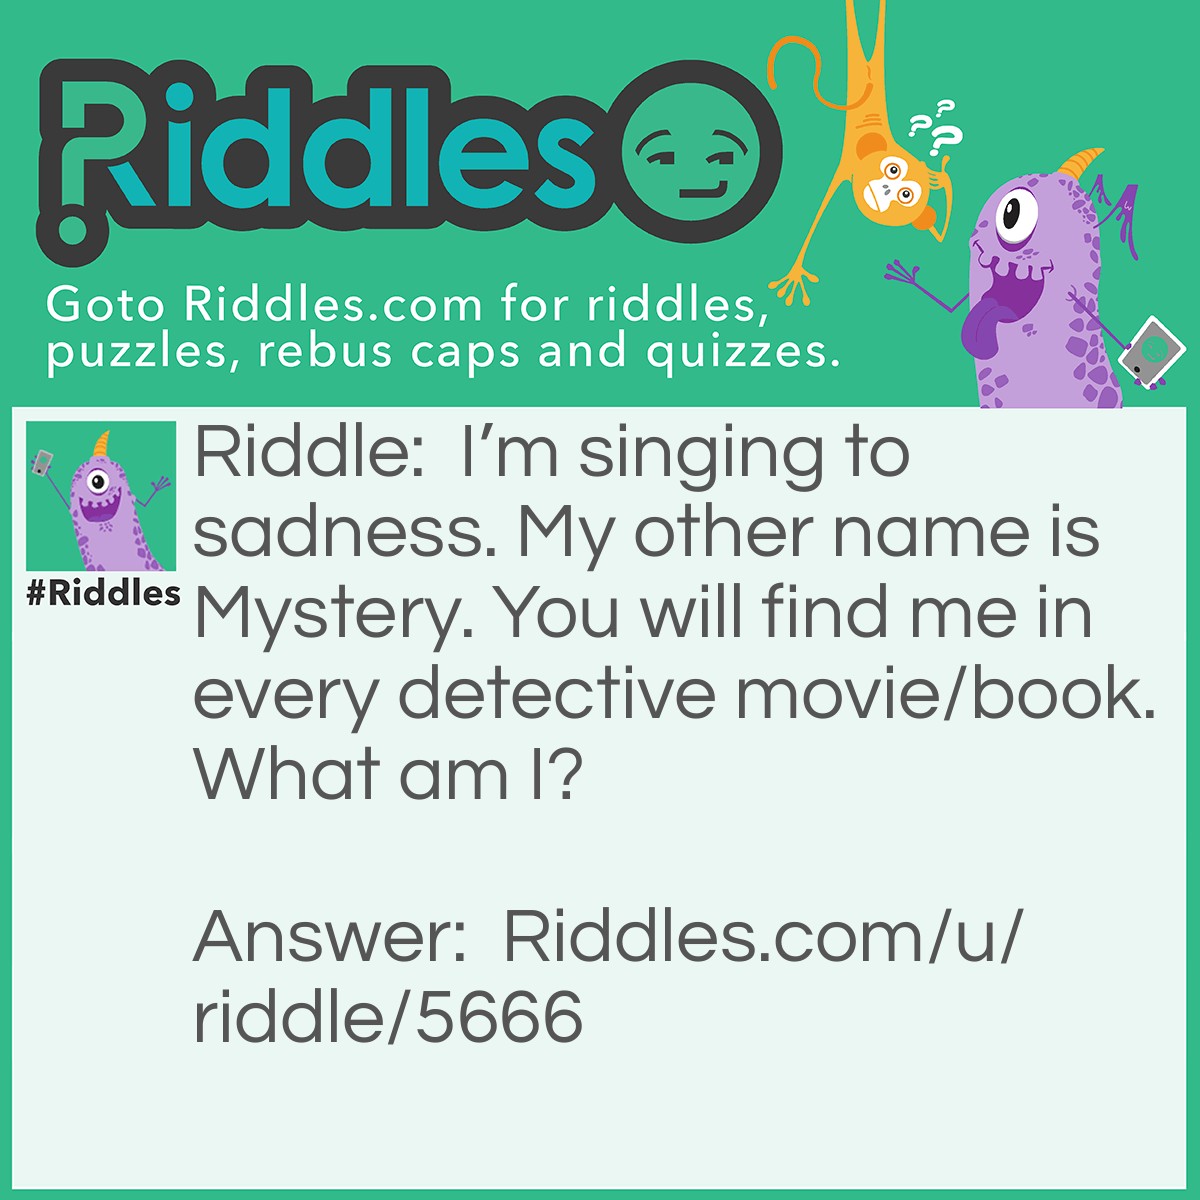 Riddle: I'm singing to sadness. My other name is Mystery. You will find me in every detective movie/book. What am I? Answer: Enigma.